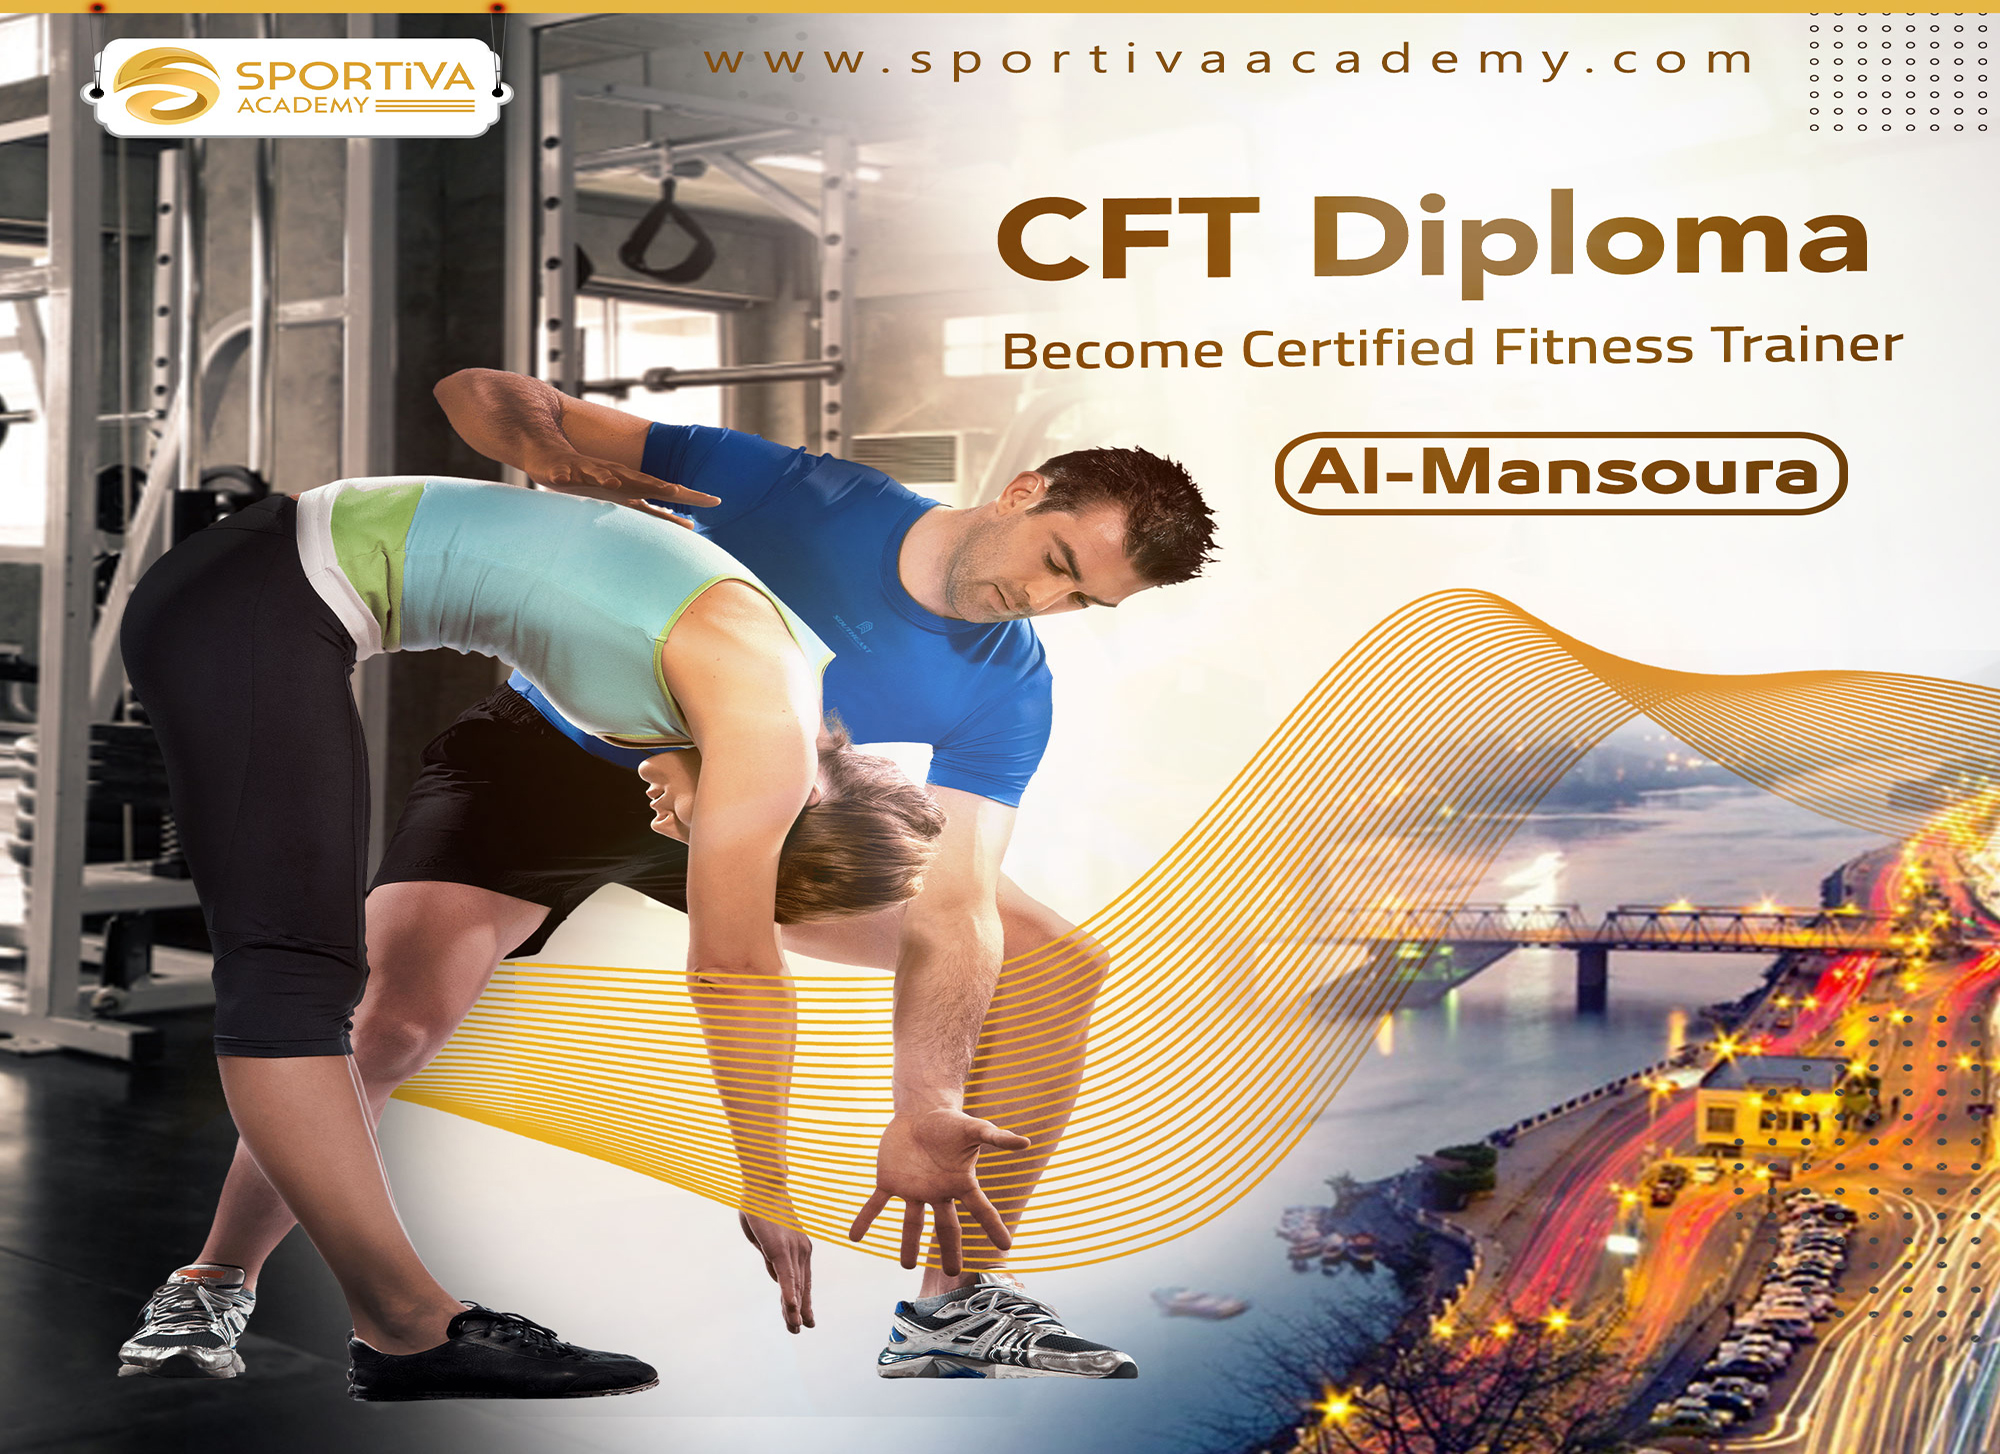 Personal trainer and fitness trainer diploma - Mansoura